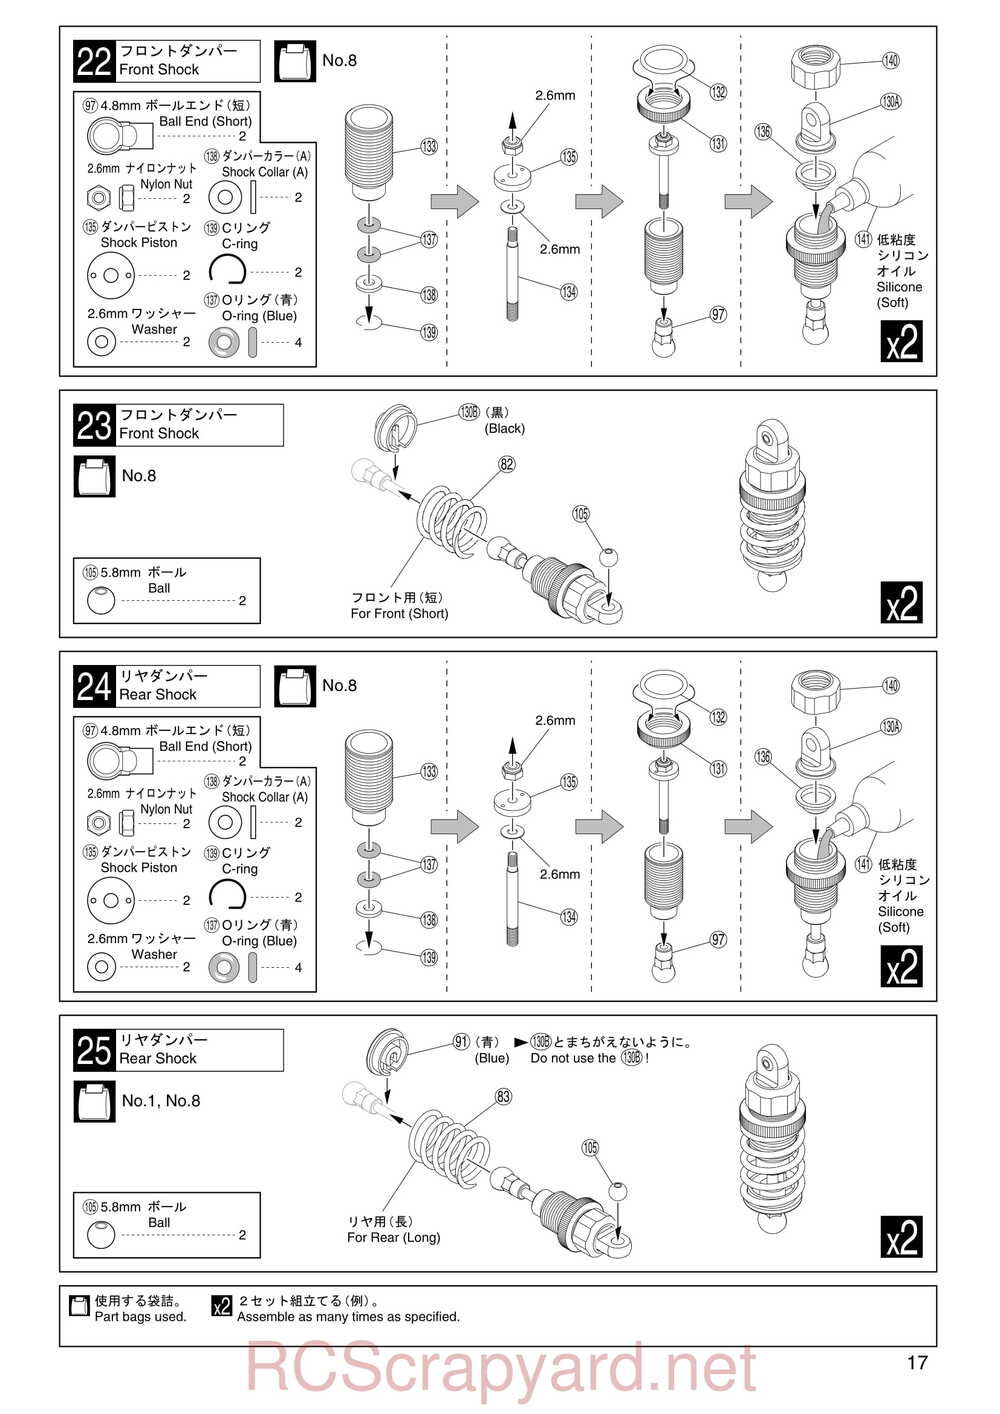 Kyosho - 31011 - V-One R - Manual - Page 17